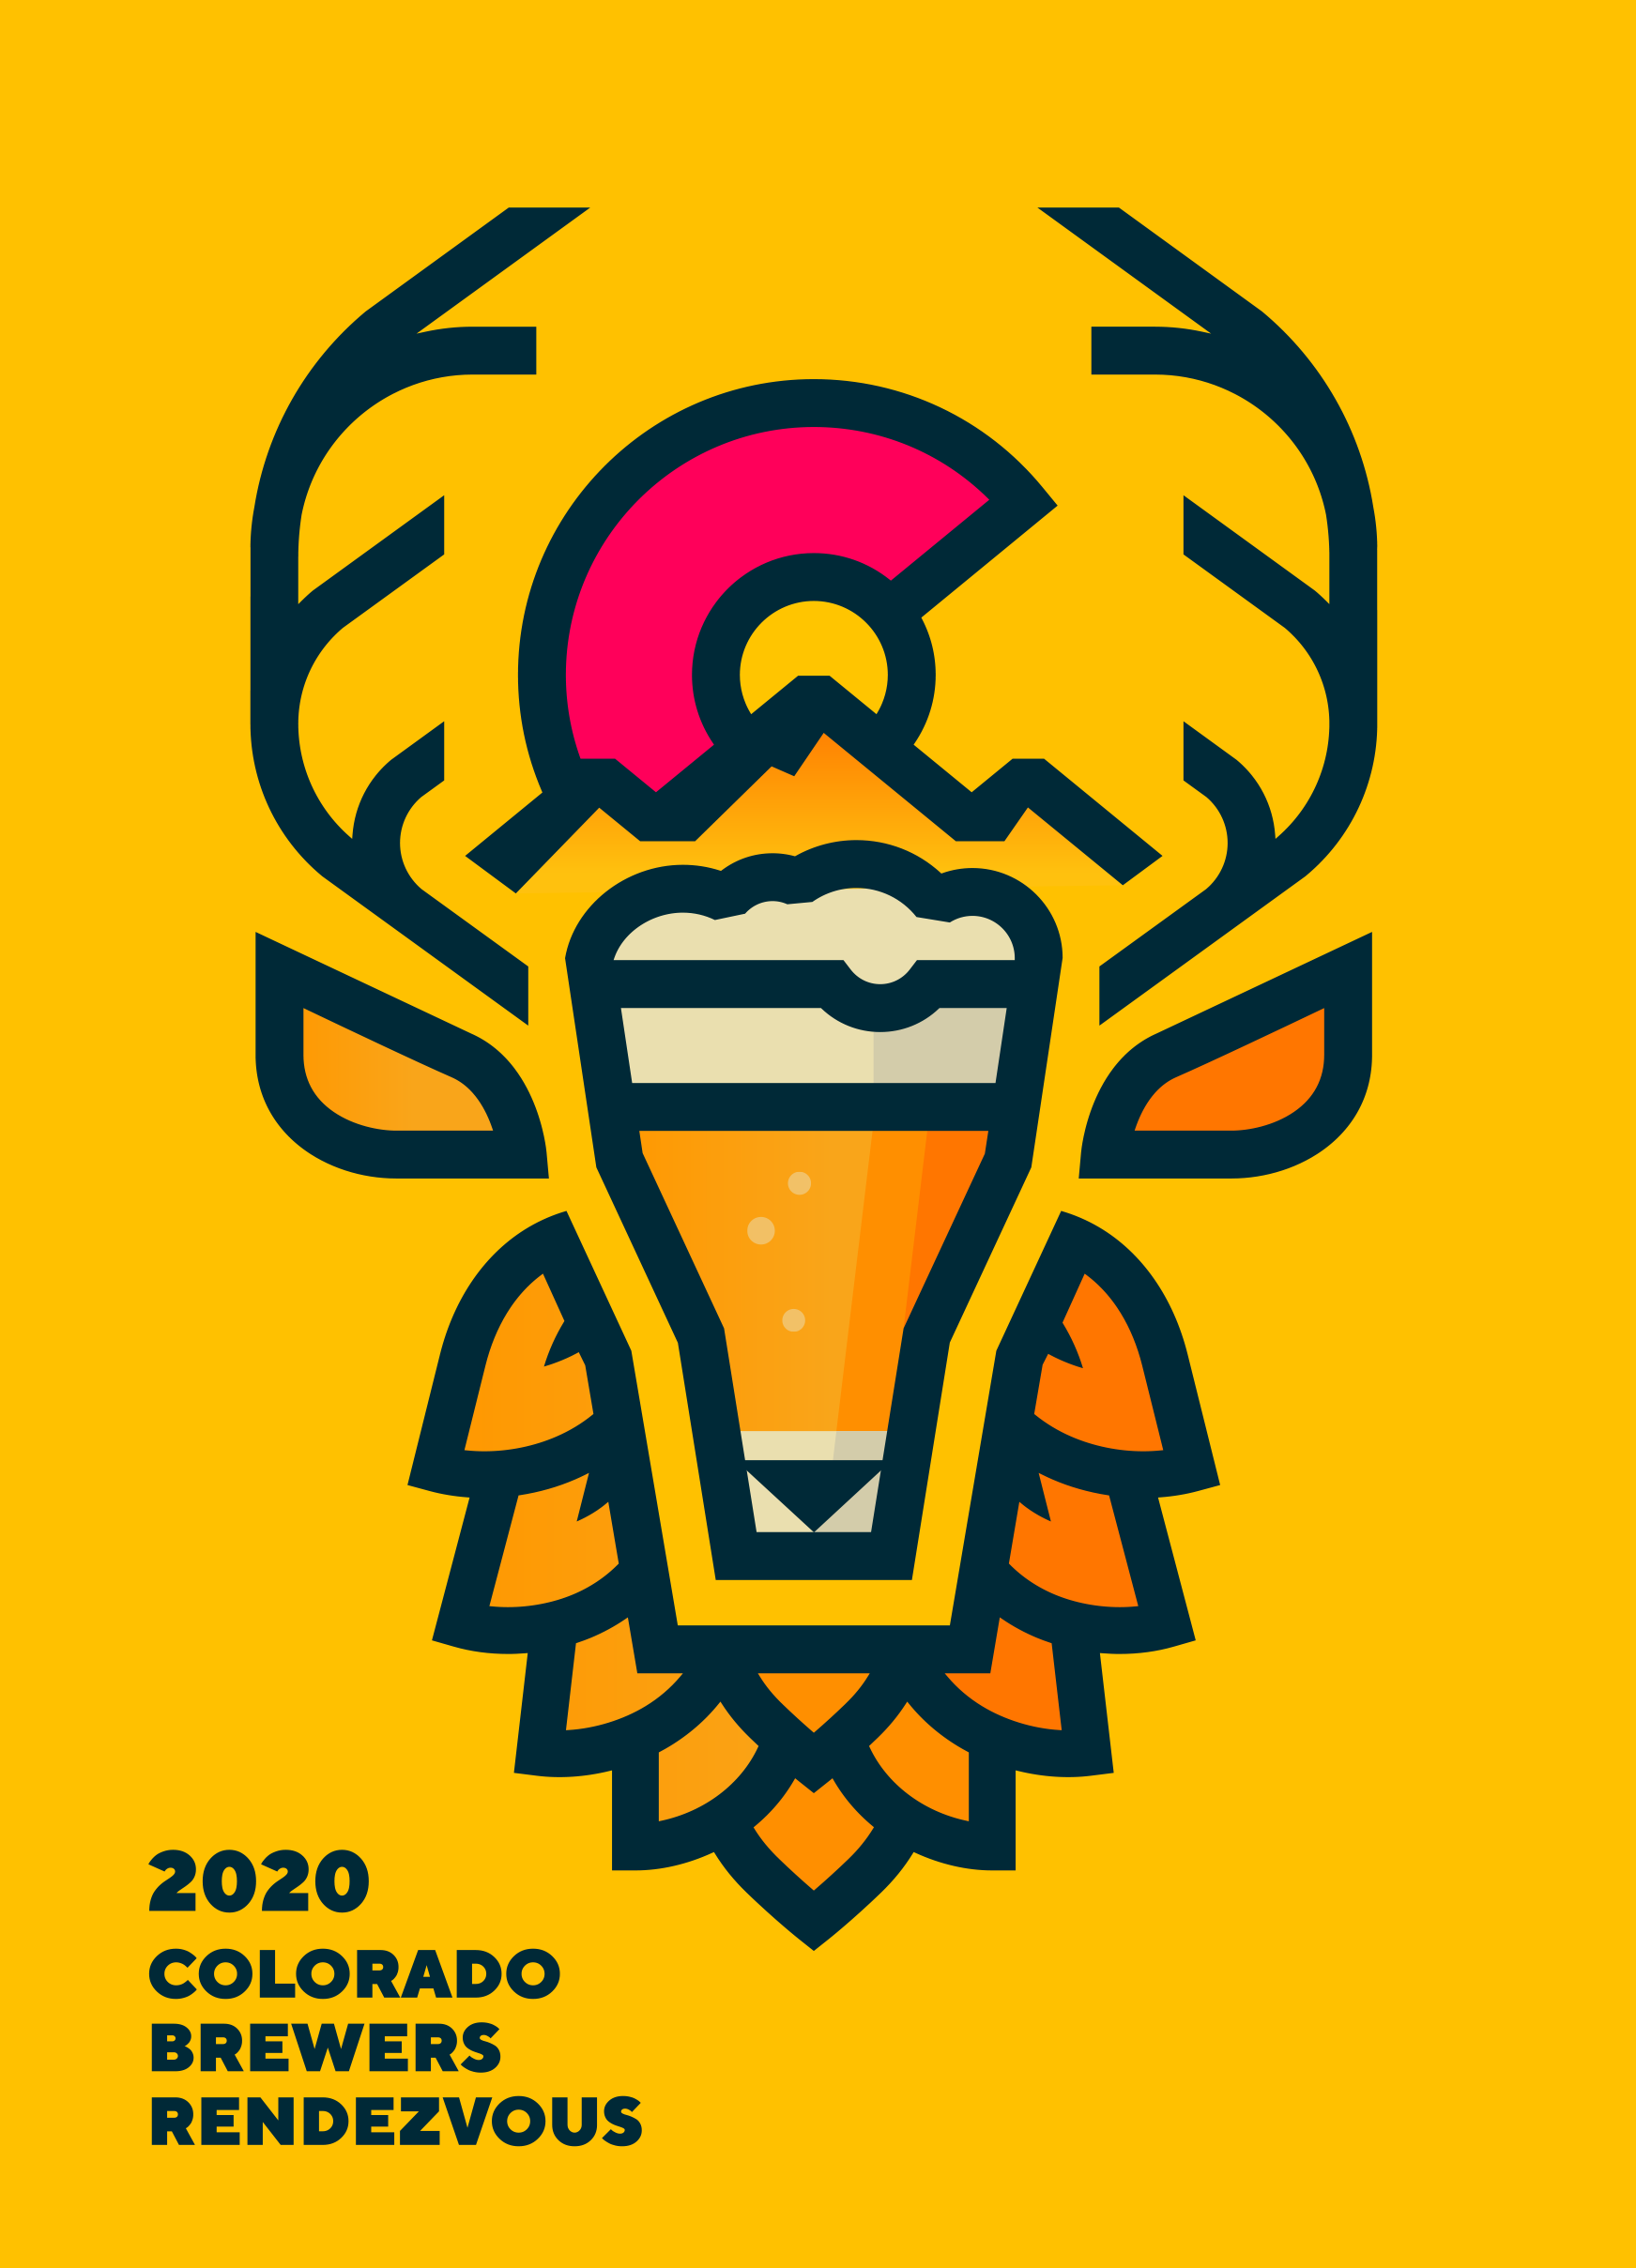 Colorado Brewers Rendezvous Poster 2020 Elk by Sunday Lounge